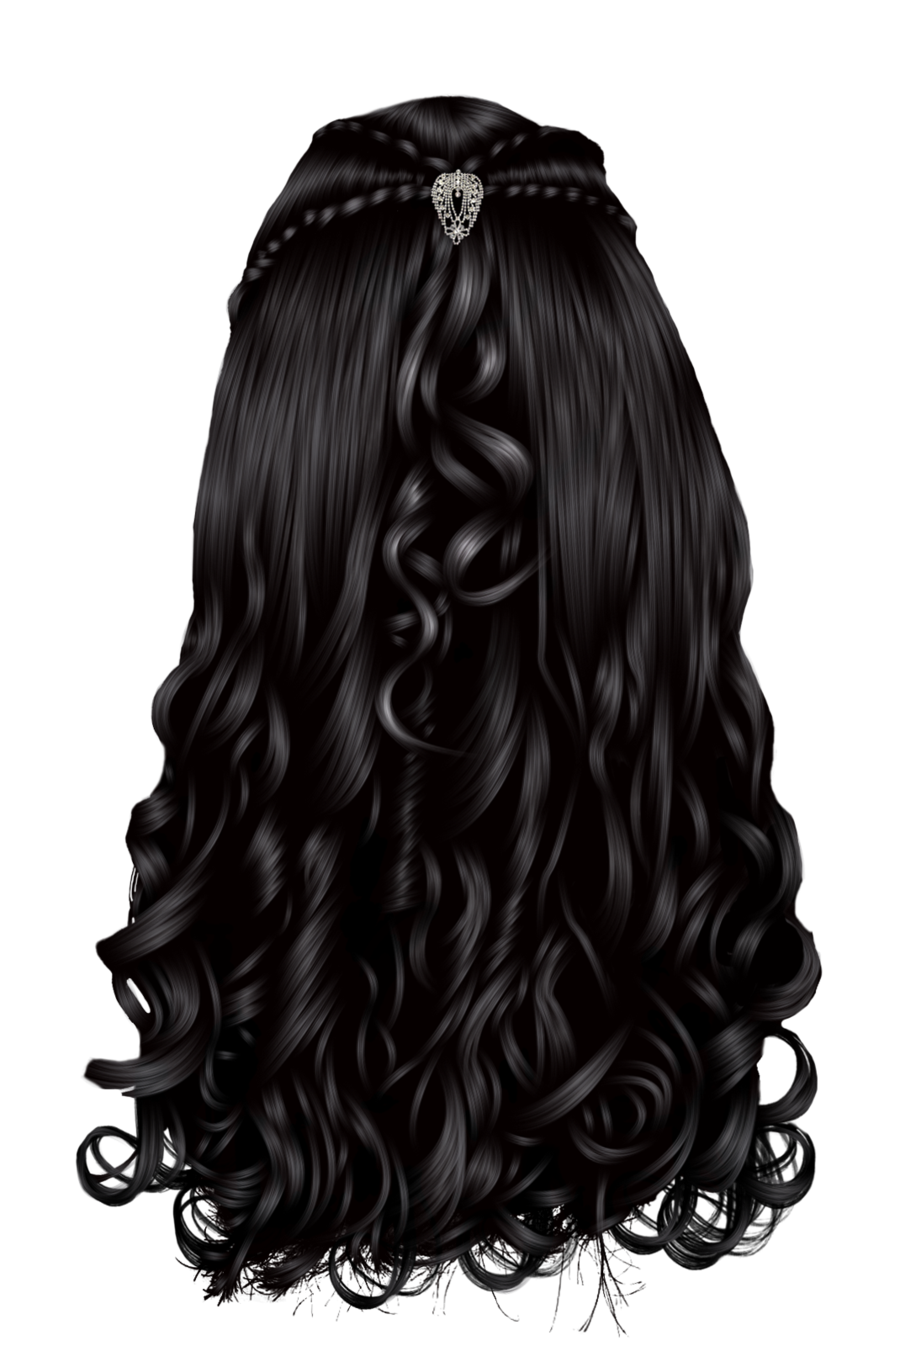 Women hair PNG image transparent image download, size: 900x1346px